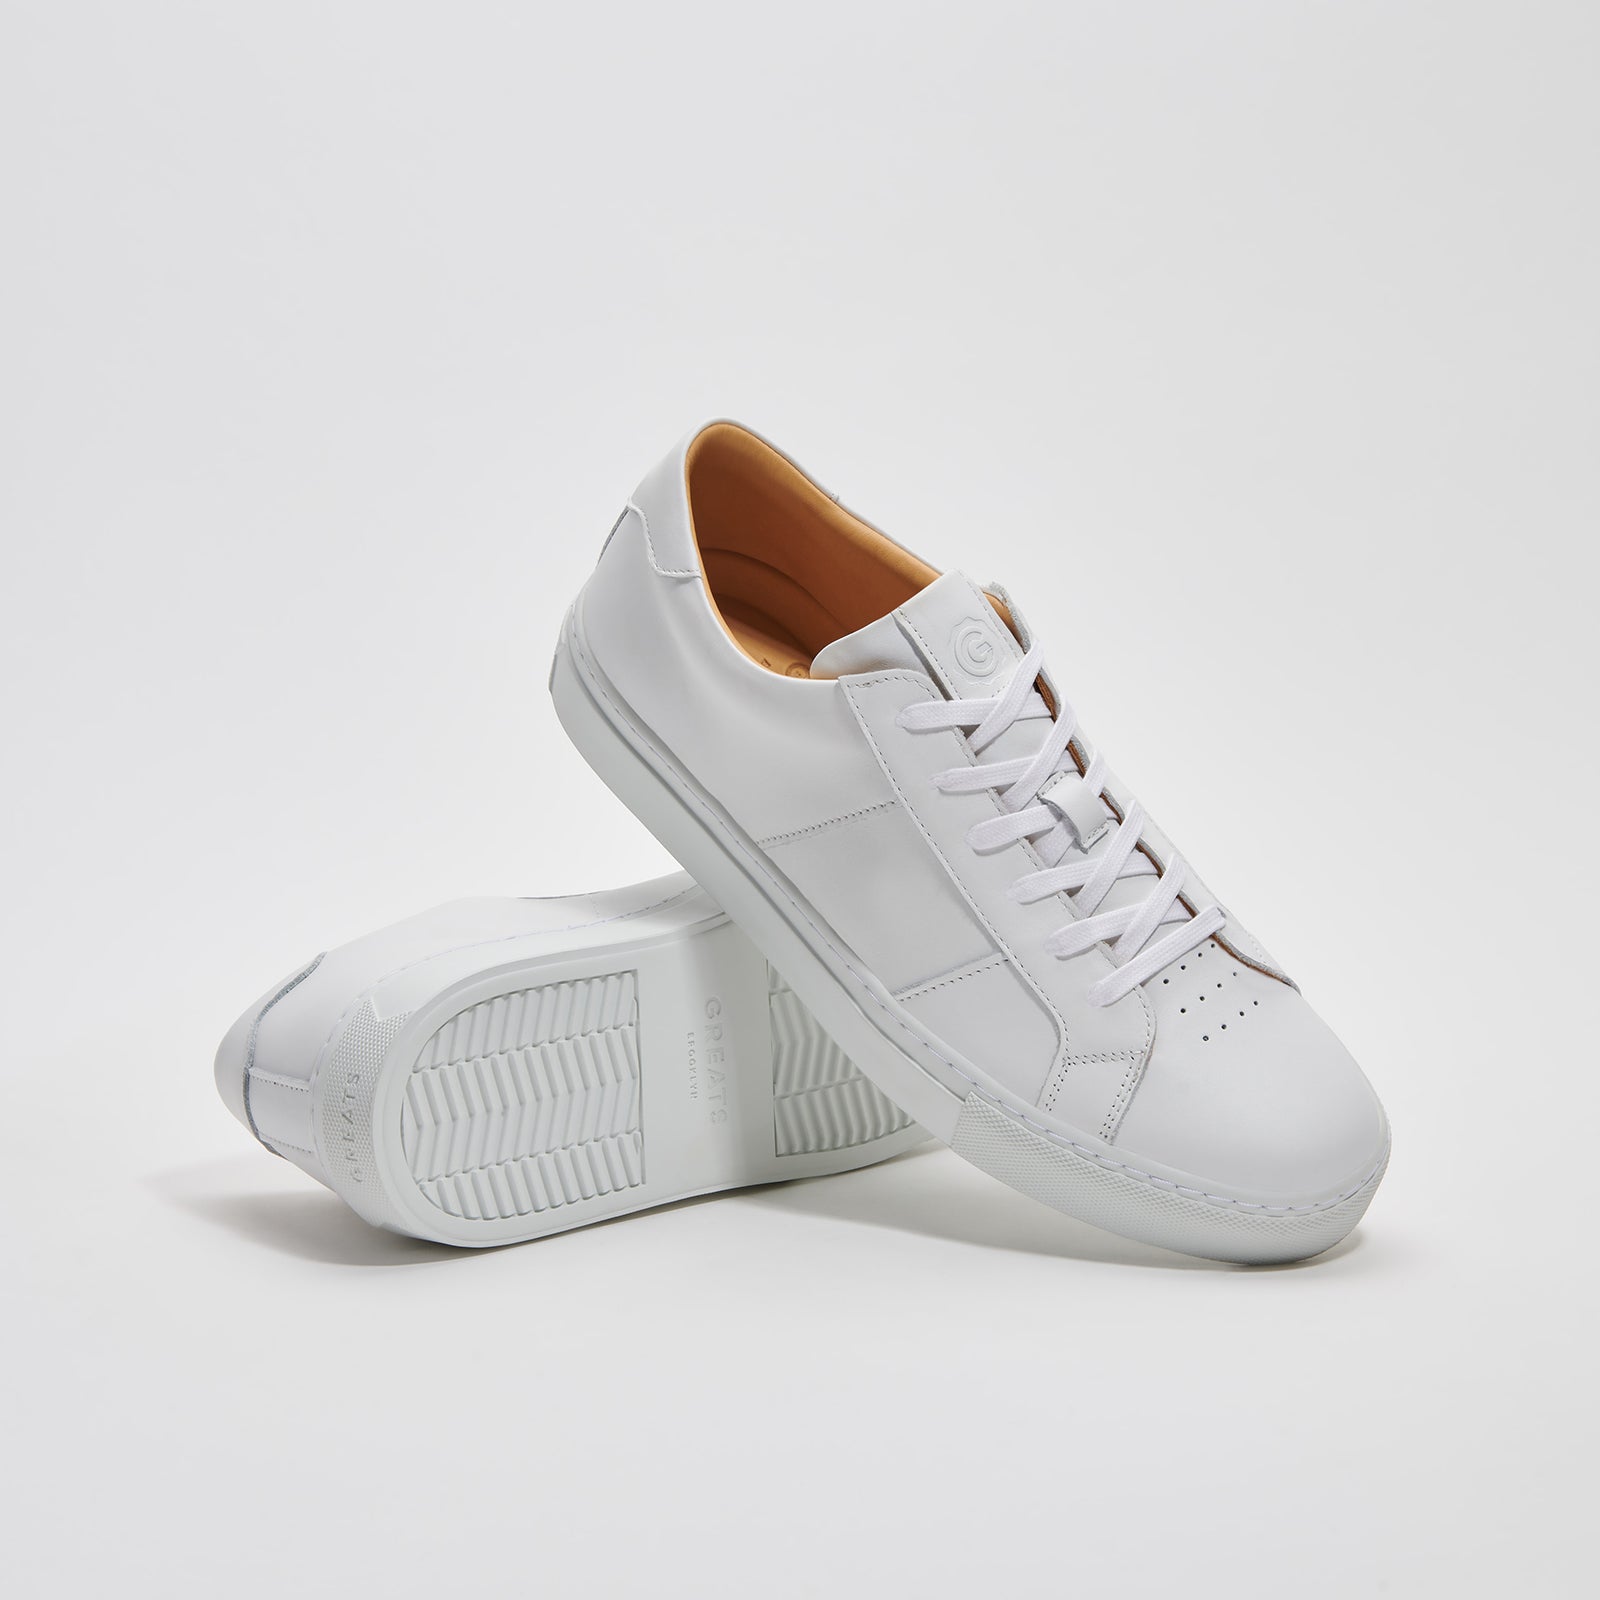 J. Crew) GREATS® Royale leather sneakers in brown, limited sizes - $74.99  with code SHOPNOW [final sale] : r/frugalmalefashion